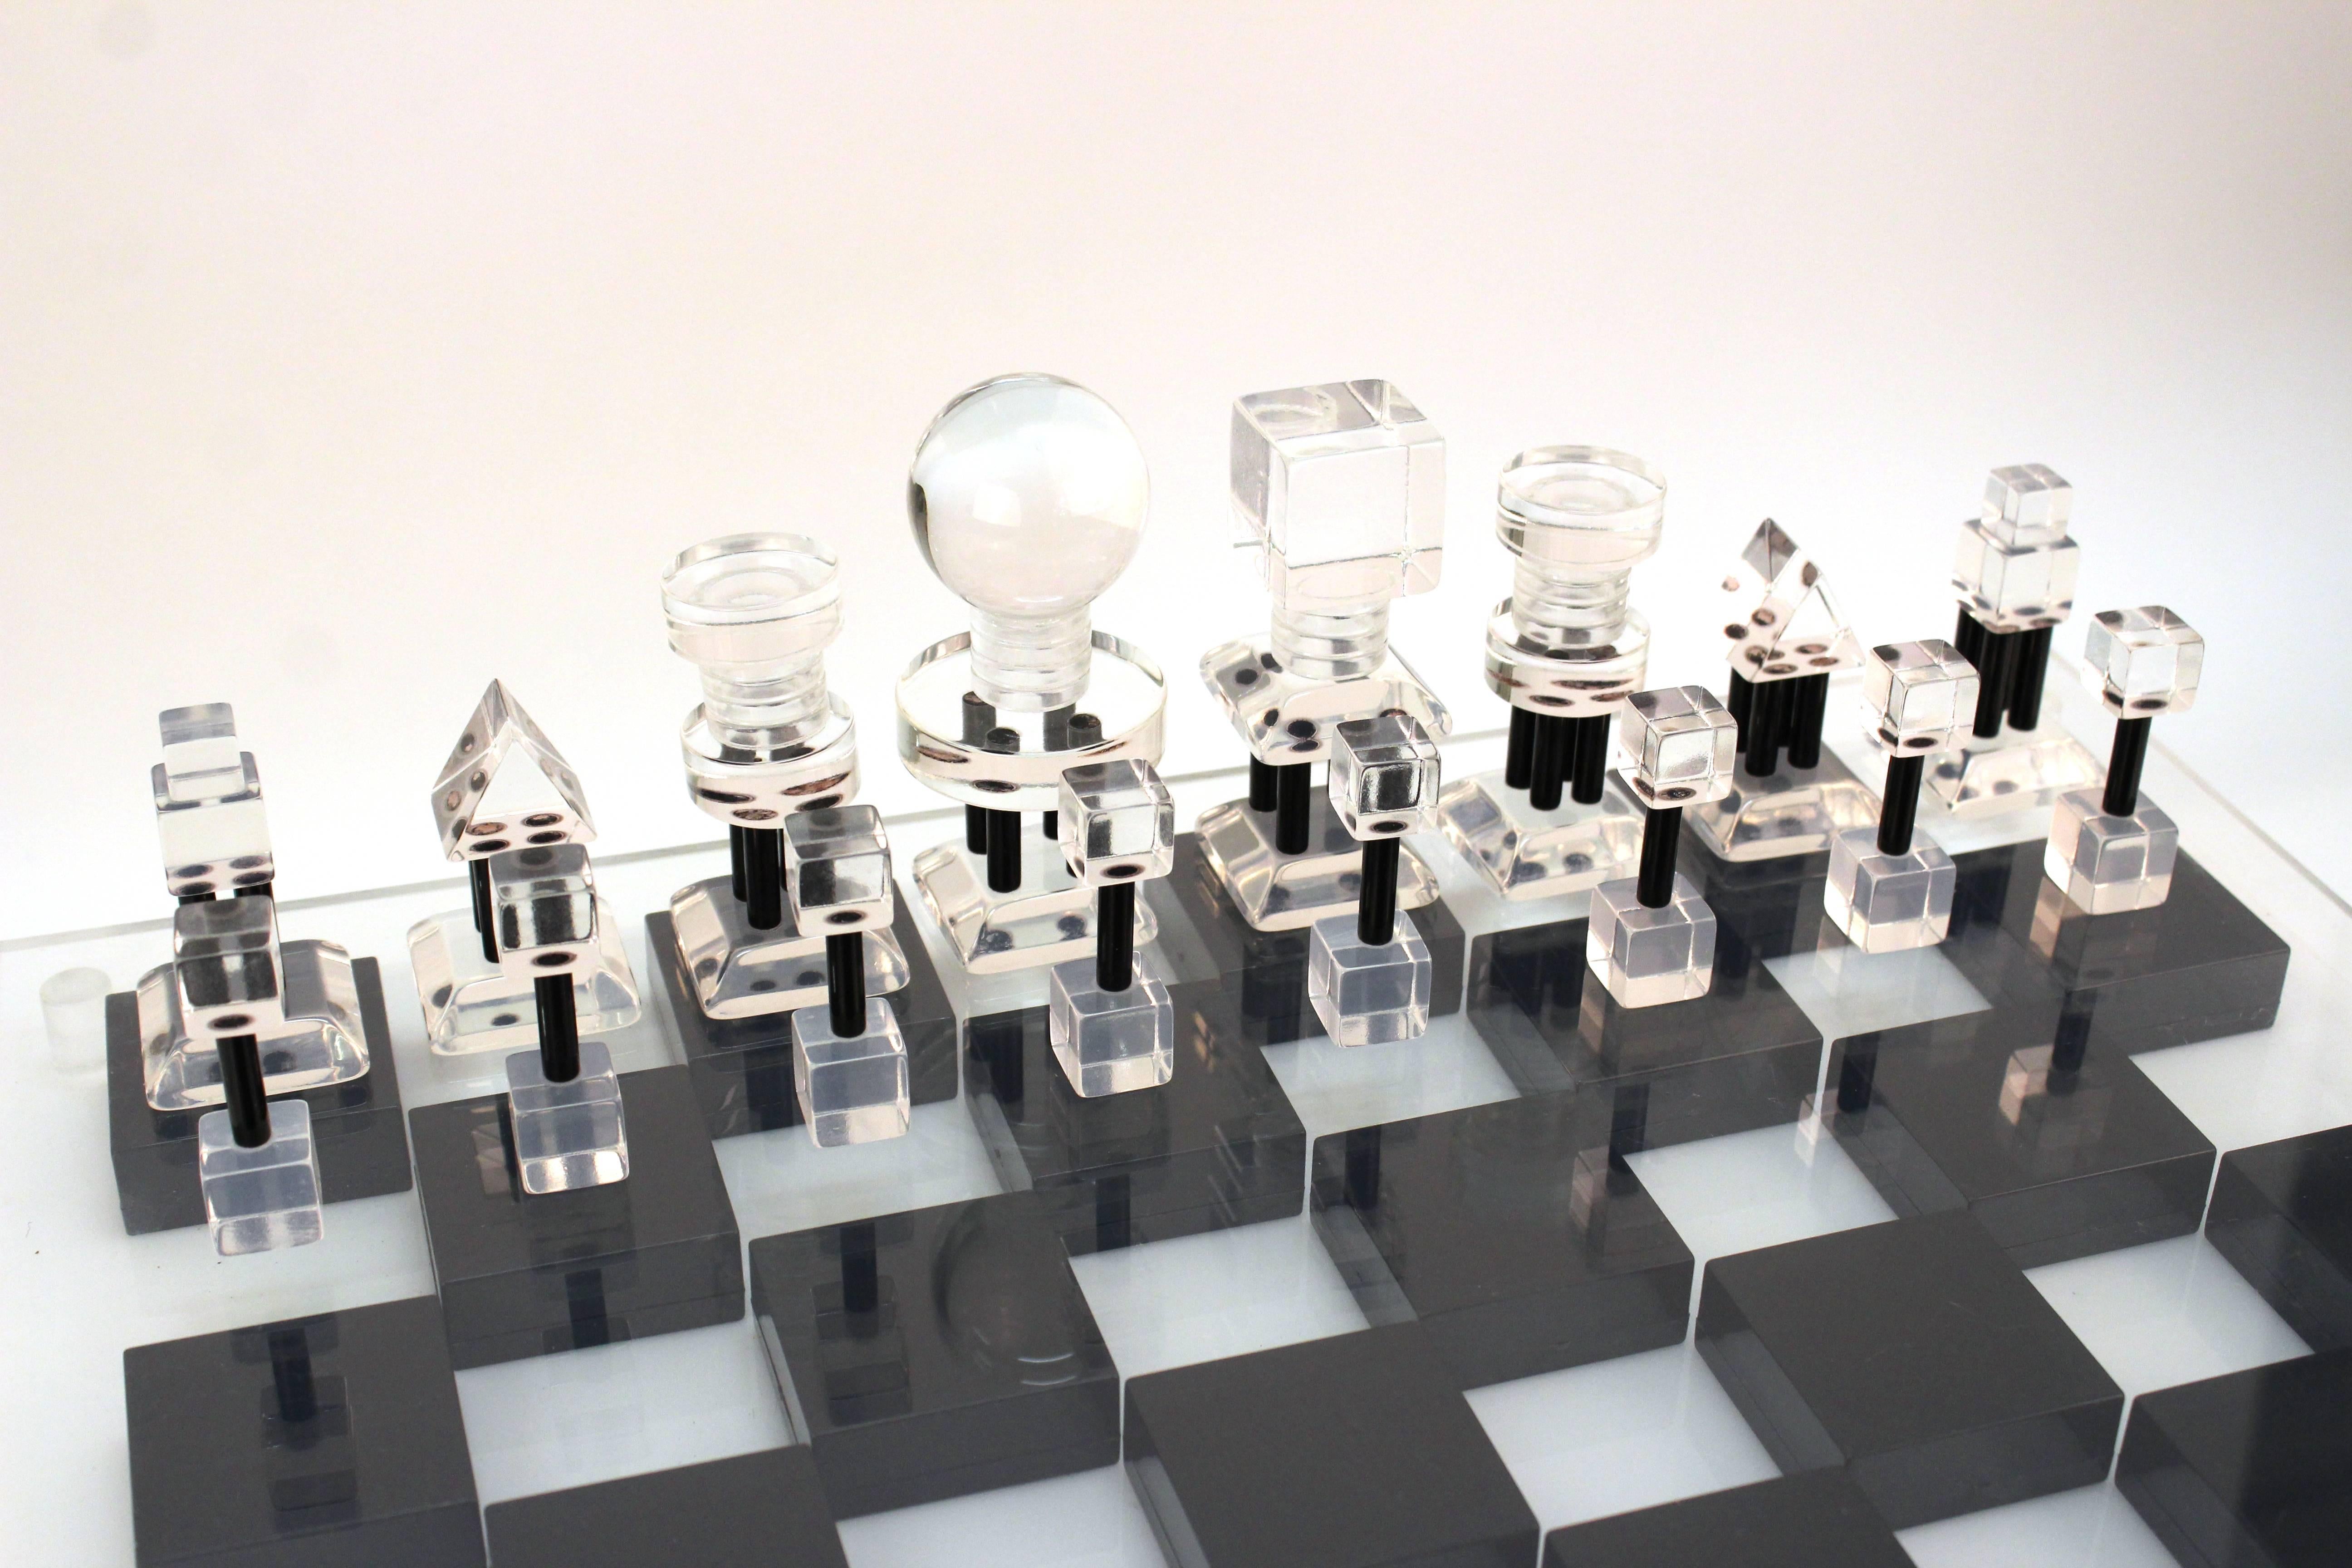 A large Mid-Century Modern Lucite black, white and clear chess set with elaborate chess pieces and a clear Lucite cover. Very rare and heavy piece, made in the 1960s in the United States. In excellent condition.